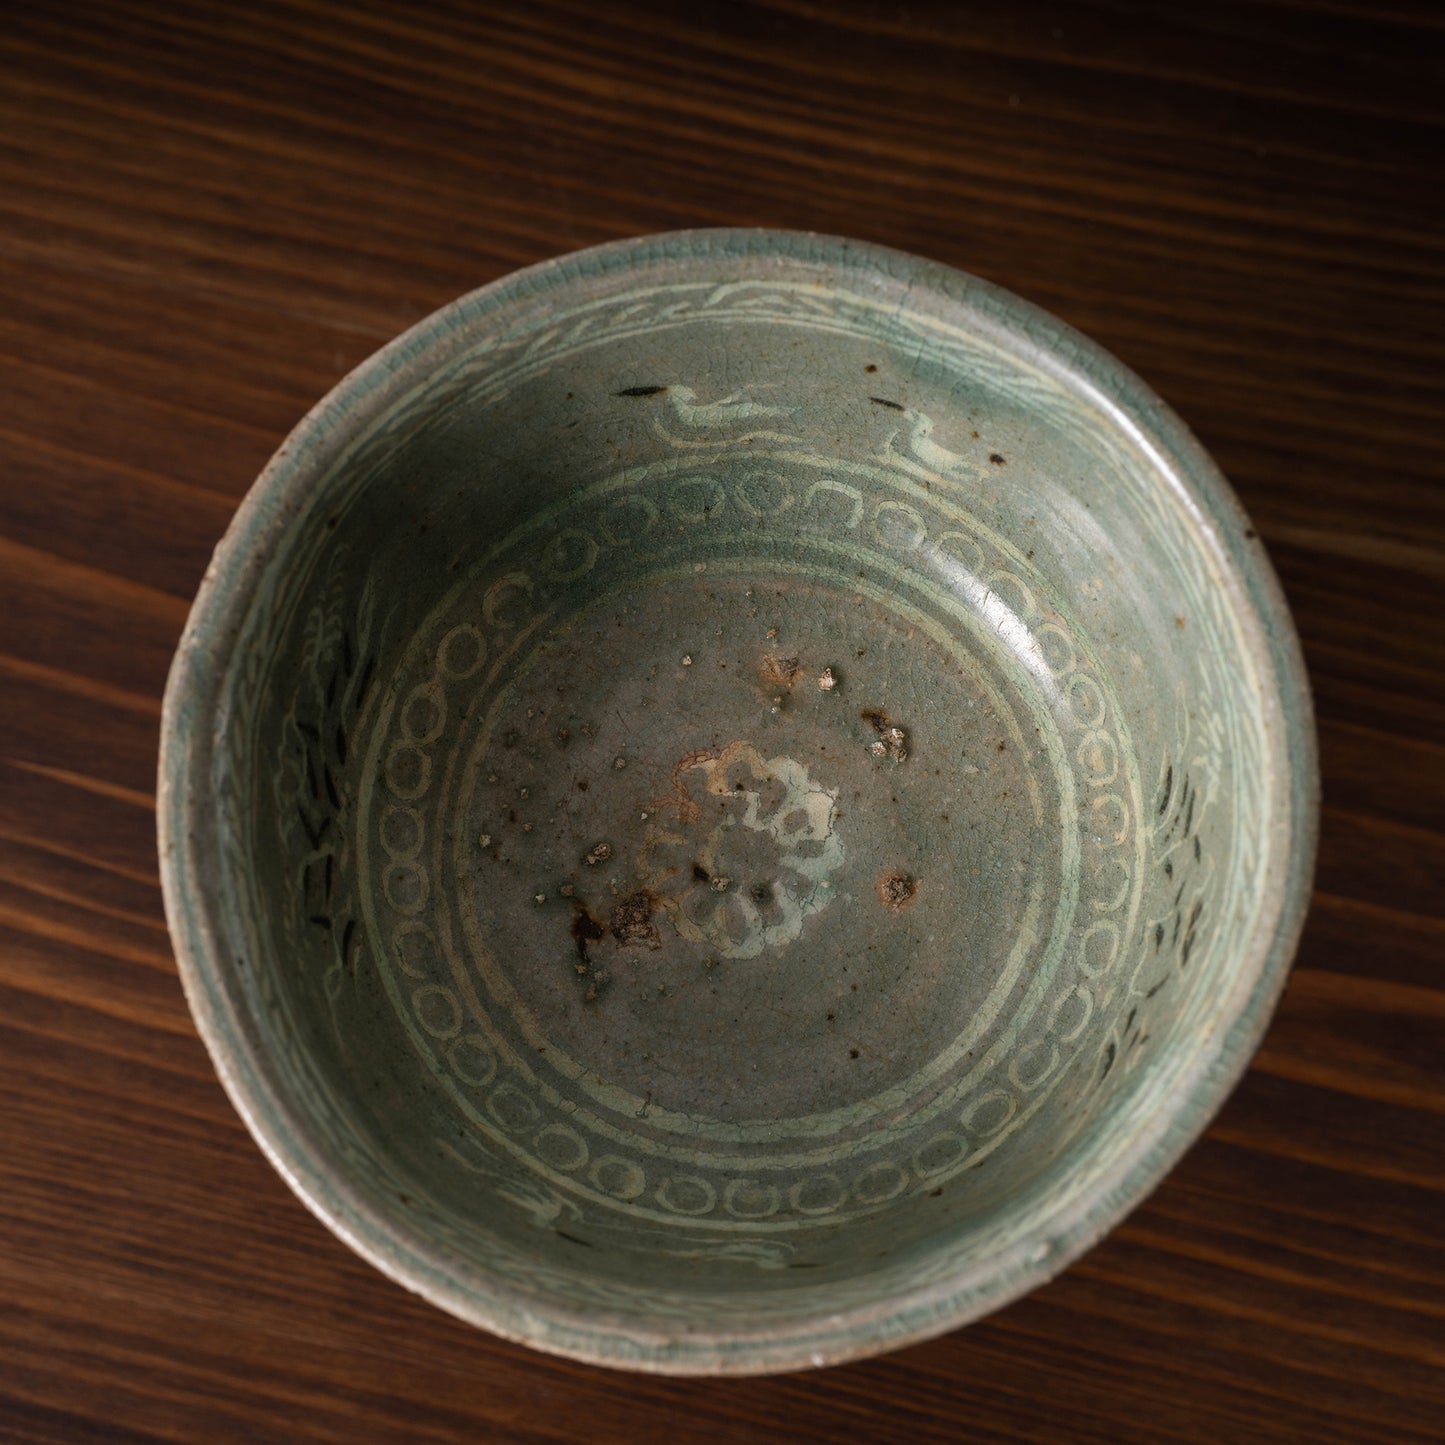 Goryeo Celadon Stem cup with Inlaid Crane Design